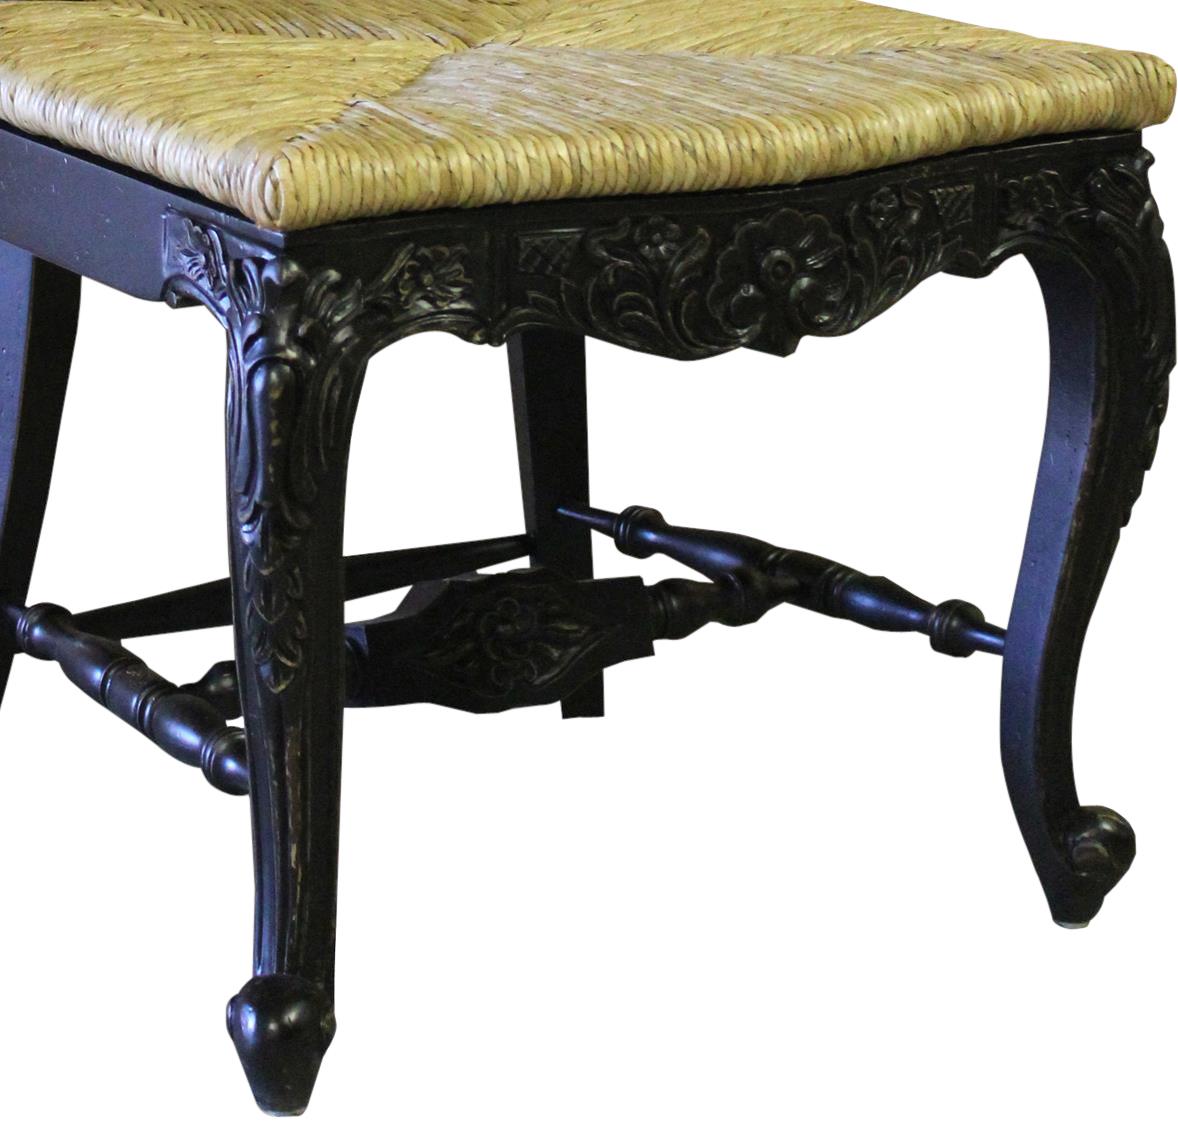 Dining Chair French Country Farmhouse Blackwash Floral Wood Carving Hand Rush-Image 2